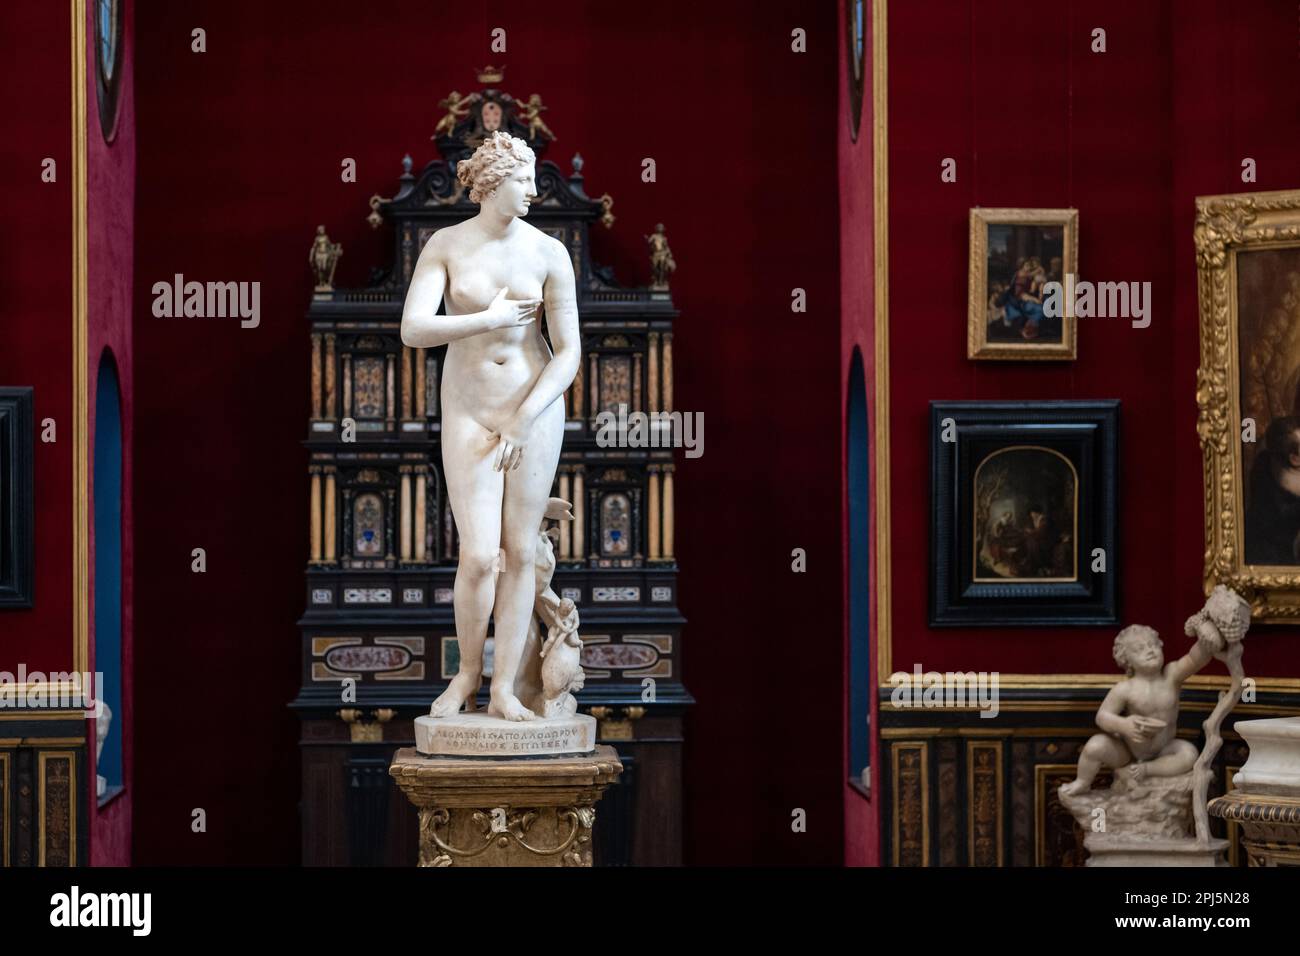 Tribuna, an octagonal room at the Uffizi housing artworks from the Medici collection, including the Medici Venus, Uffizi, Florence Stock Photo